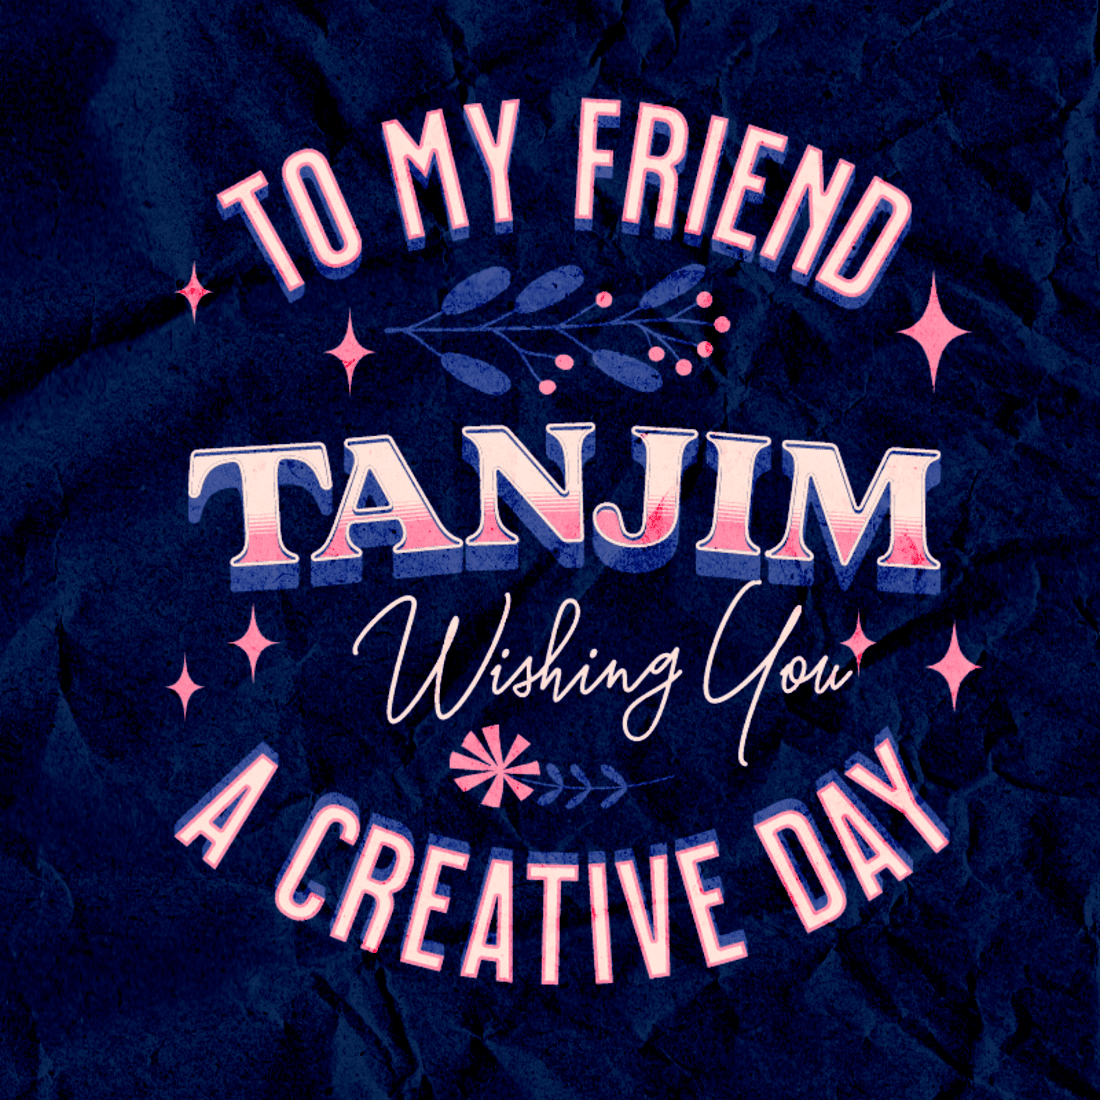 7 T-Shirt Designs For Women, creative day greetings.